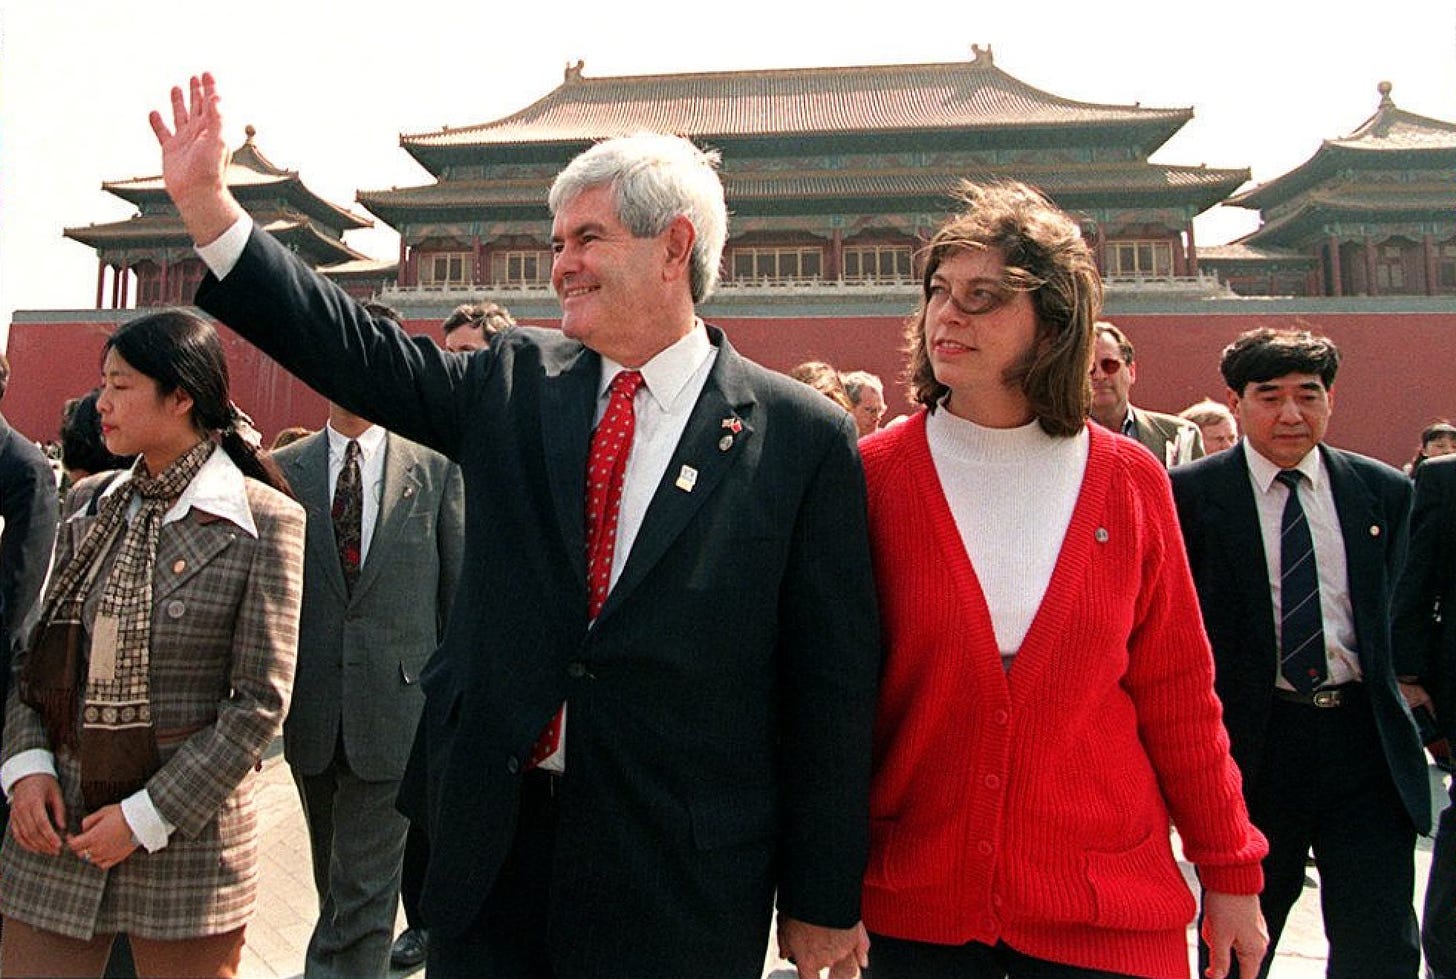 Then US House speaker Newt Gingrich waves as he tours the Forbidden City in Beijing with his wife Marianne on March 28, 1997. Gingrich followed in the footsteps of vice-president Al Gore, who visited Beijing earlier that week. Photo: AFP